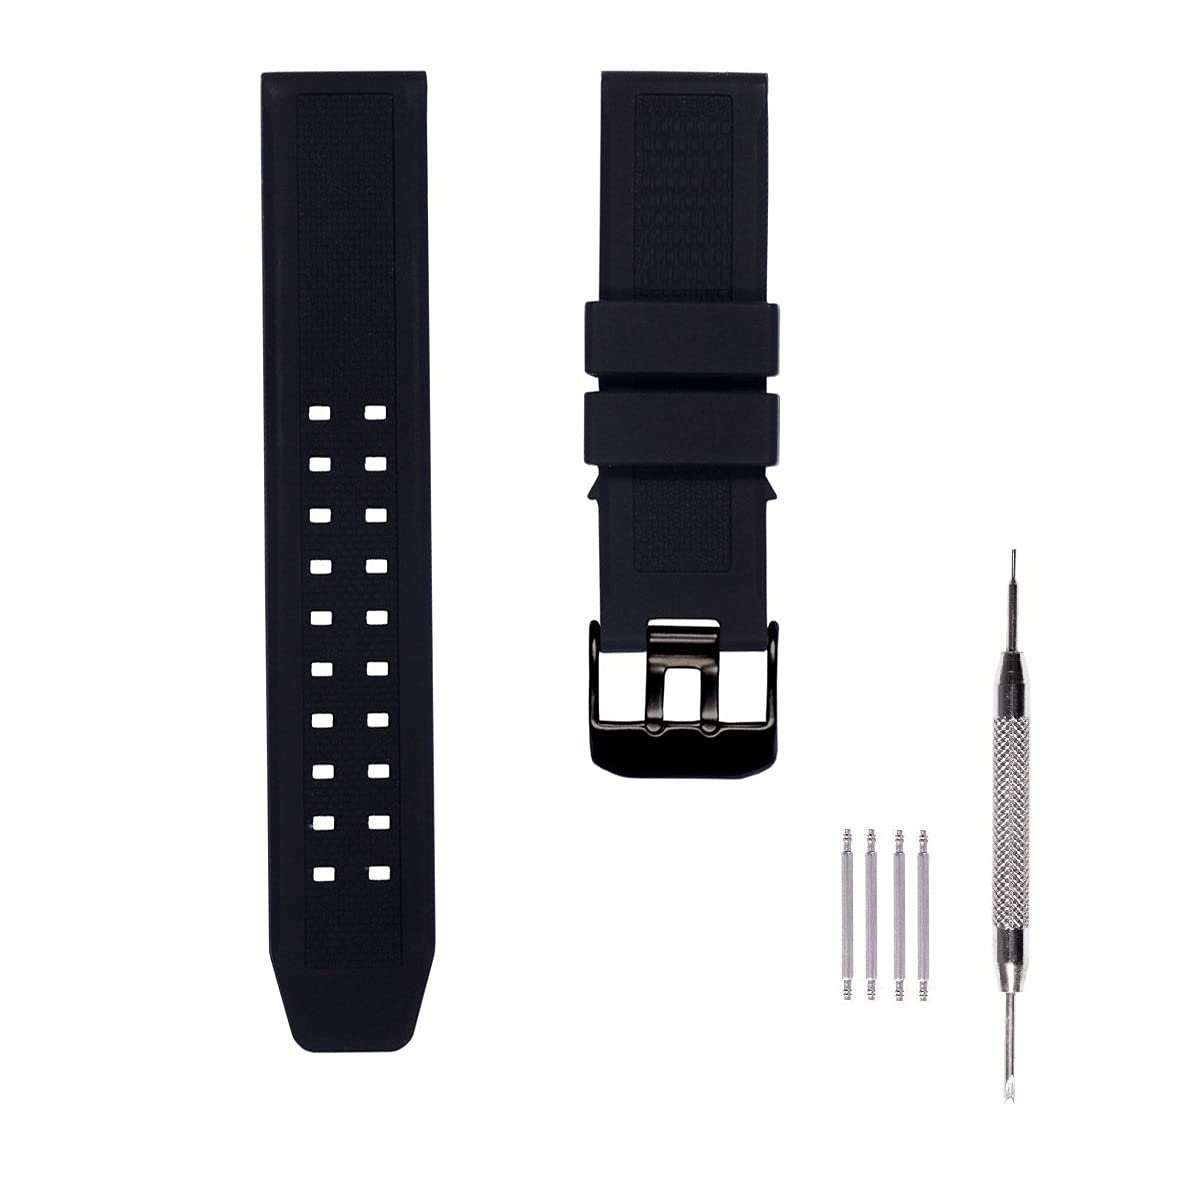 23mm Rubber Silicone Watch Band Strap Replacement with Black/Silver Double Prong Clasp for Luminox 3050 8800 and 3950 Series - Luminox Navy Seal Watch Band